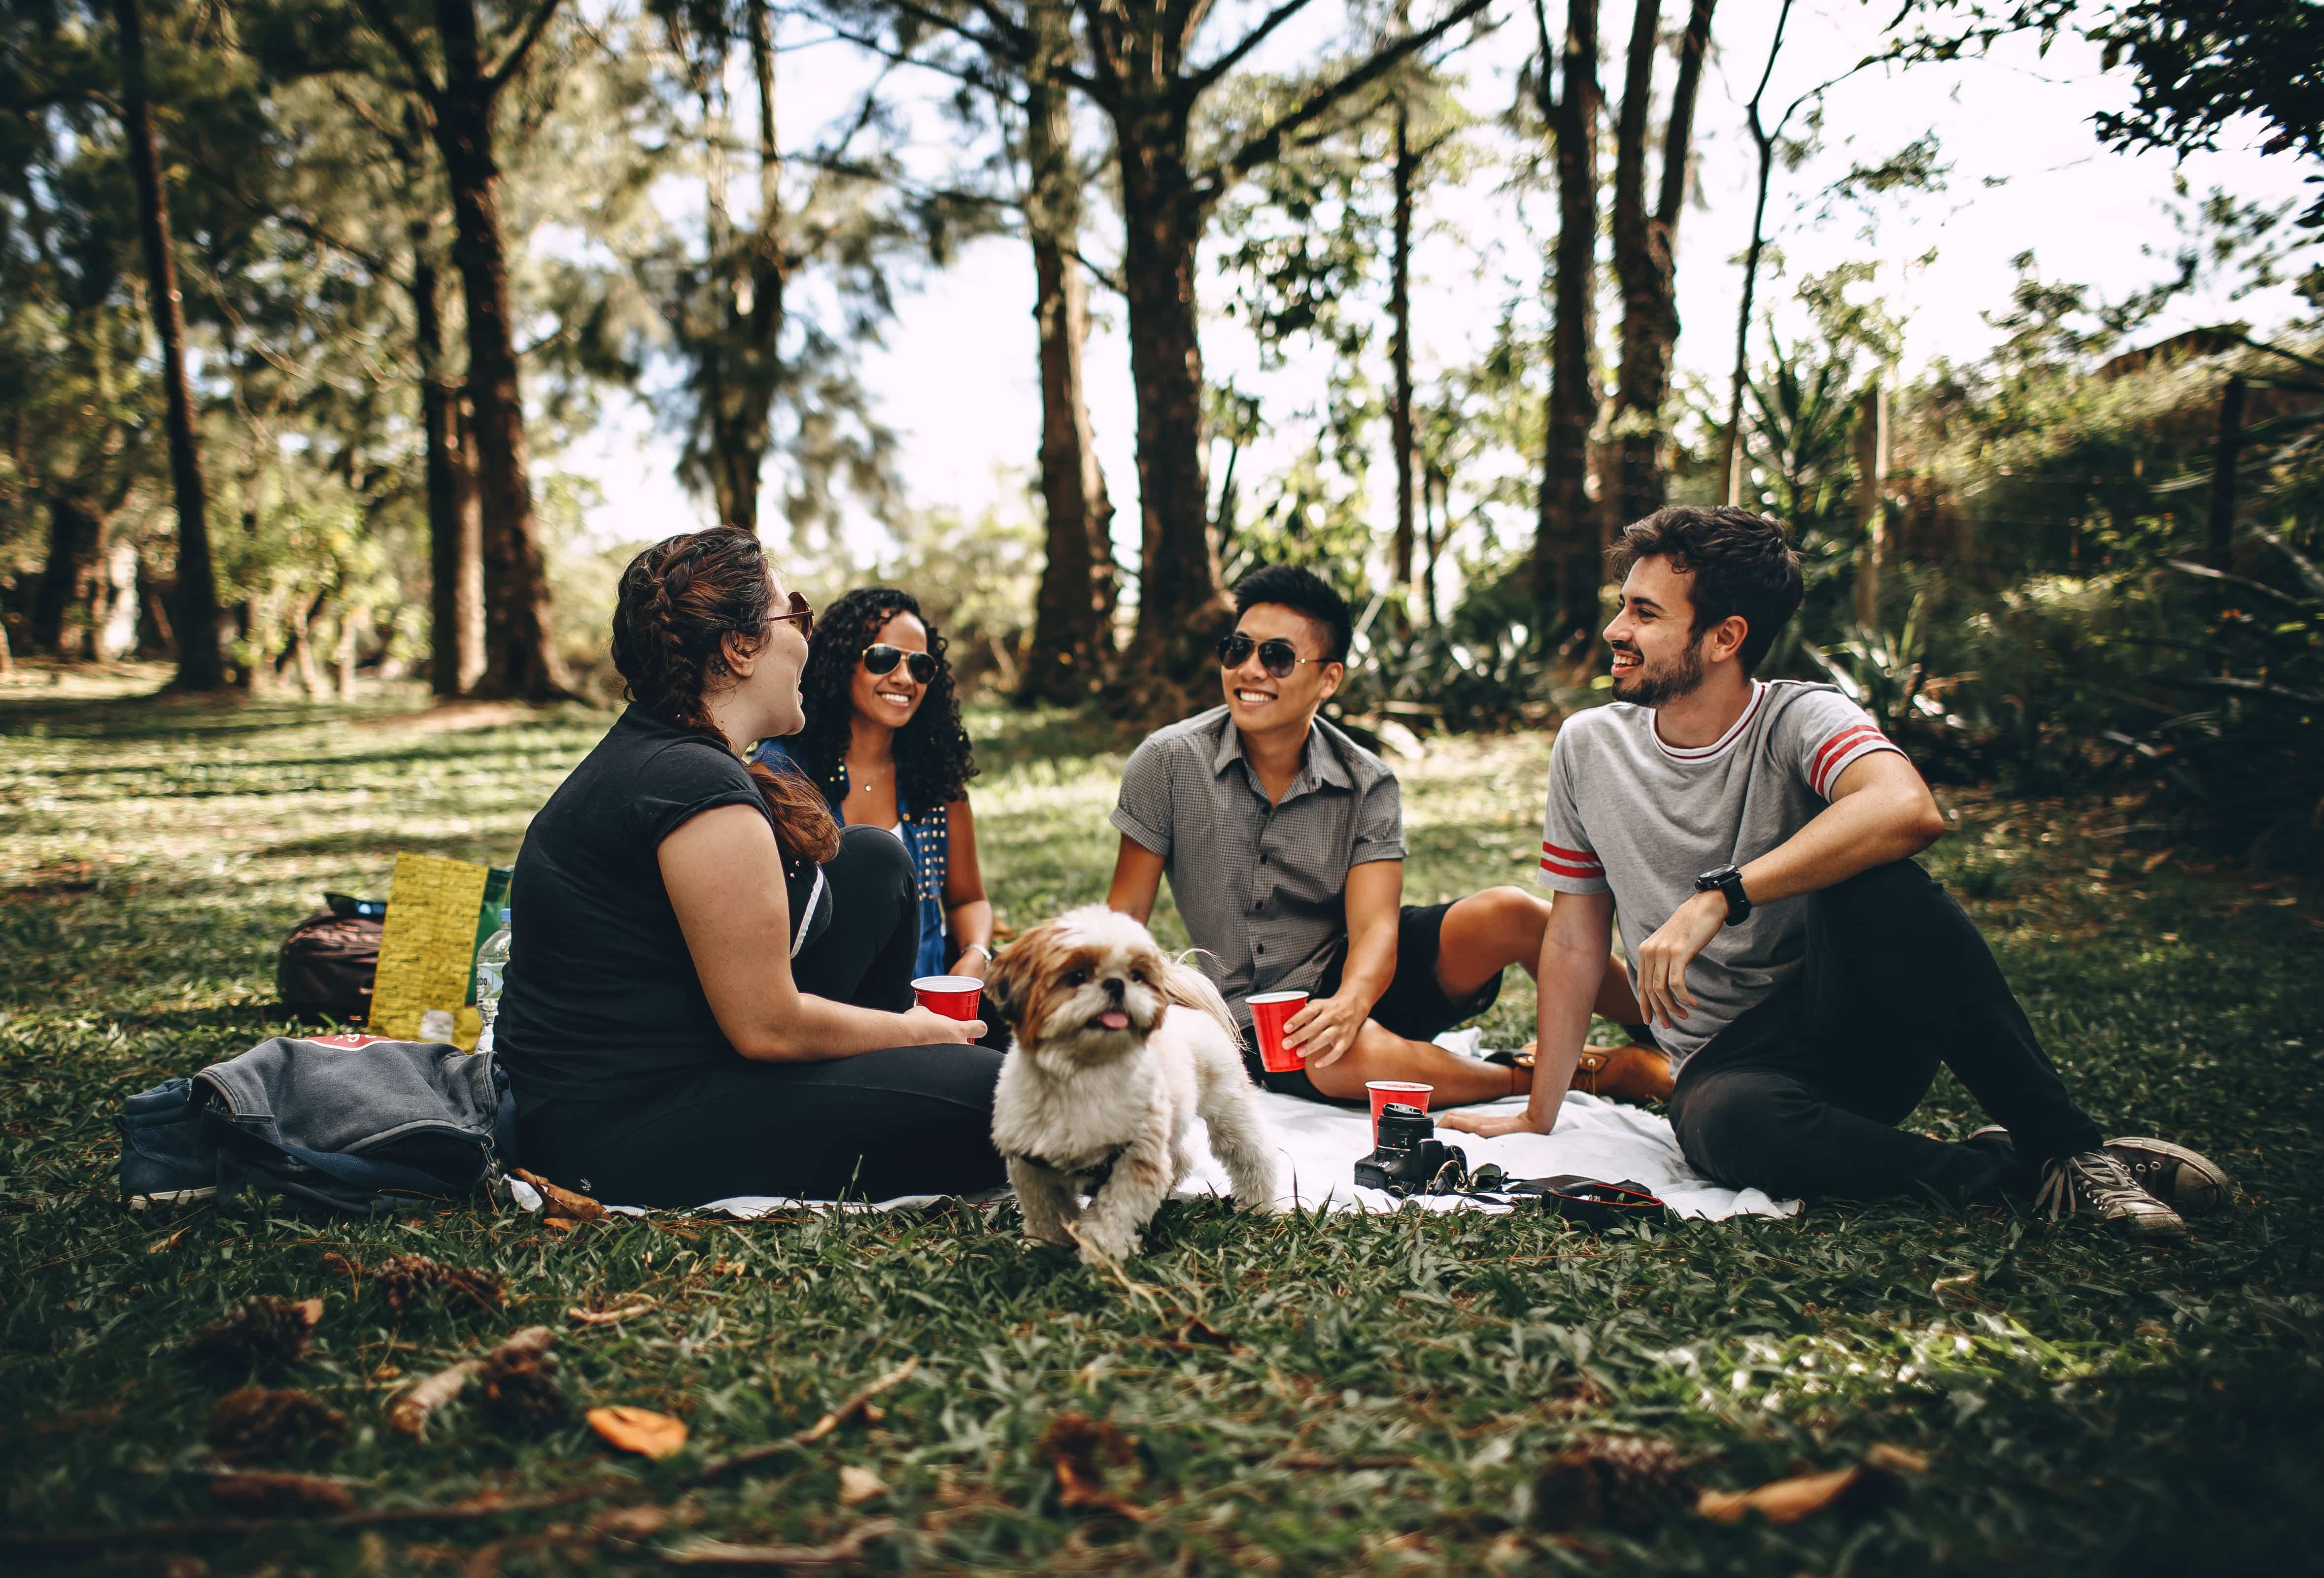 A group of friends has a picnic in a park